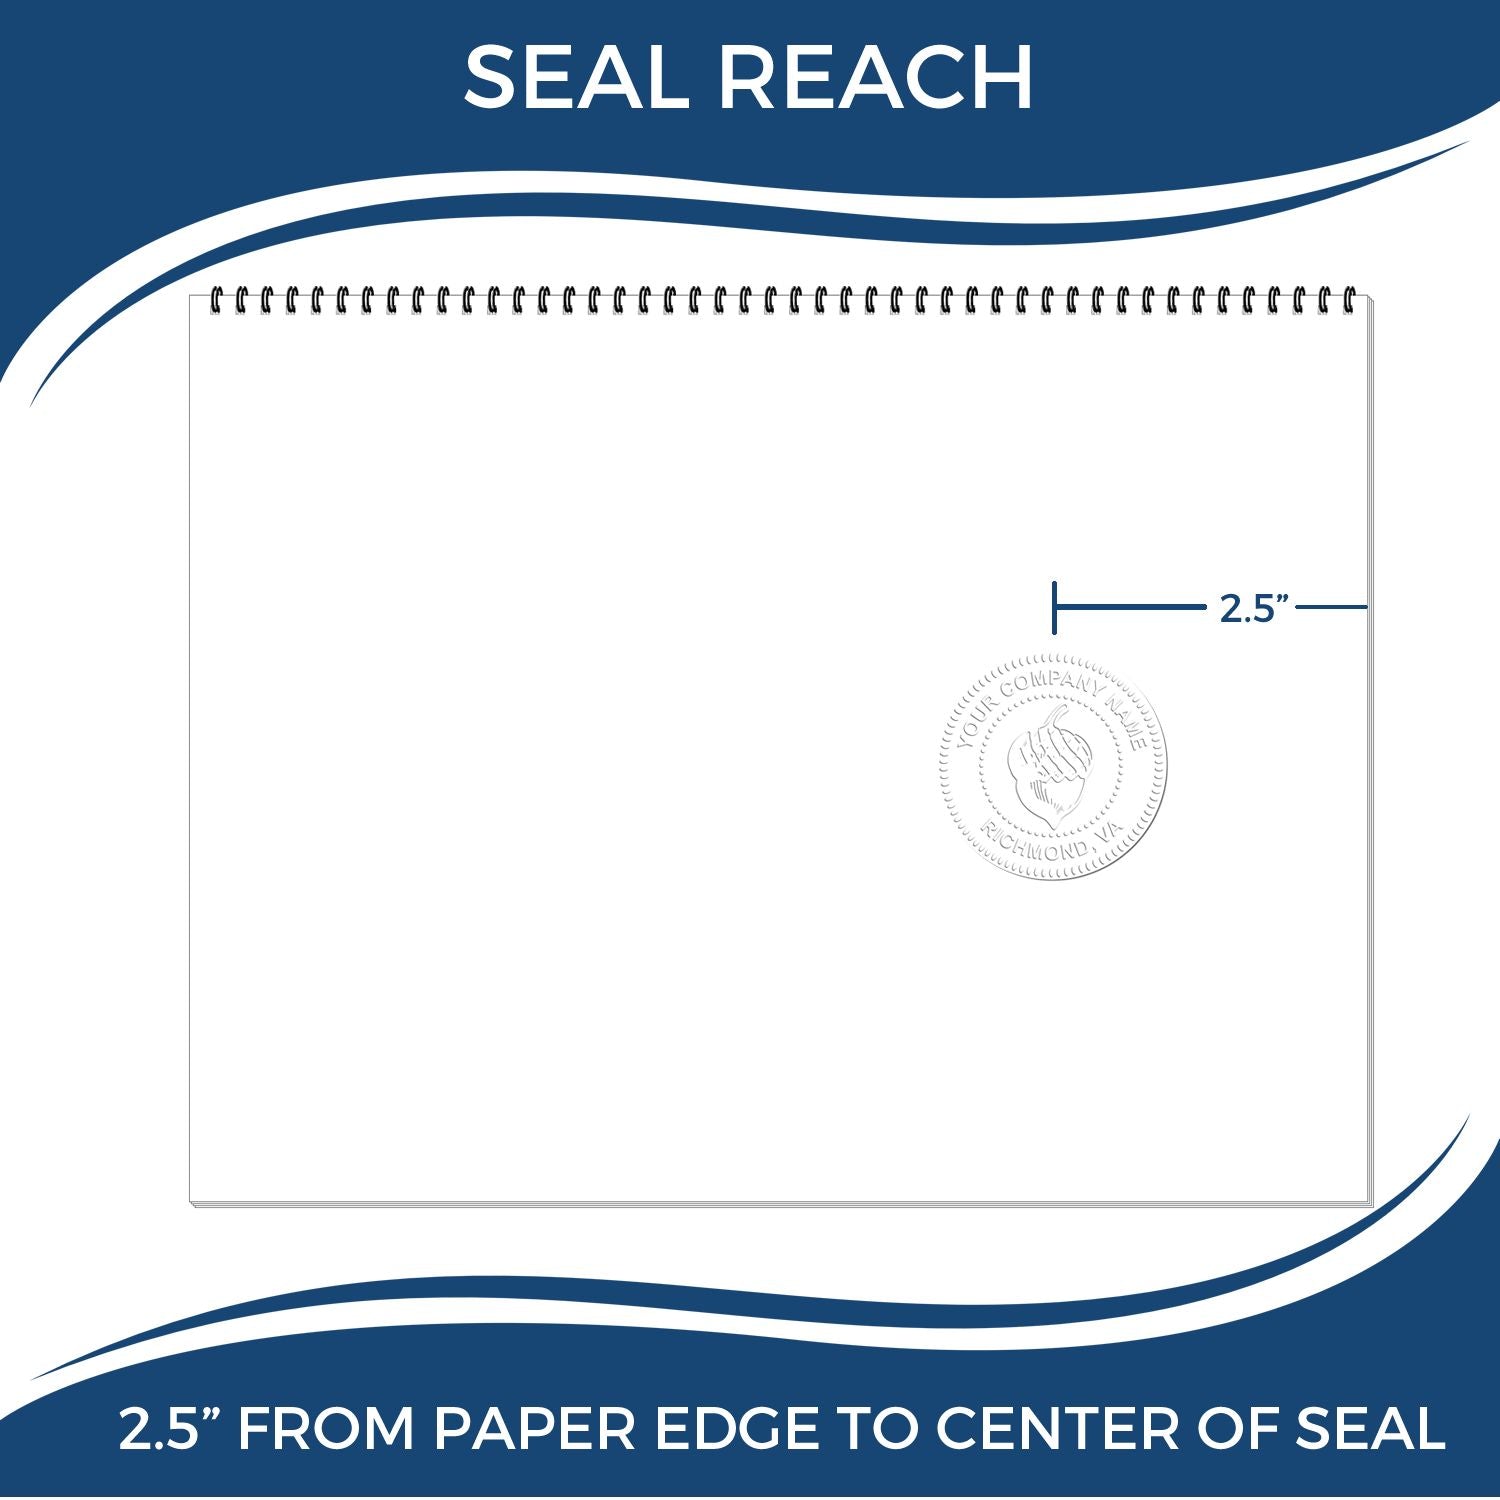 An infographic showing the seal reach which is represented by a ruler and a miniature seal image of the Long Reach New Jersey Geology Seal